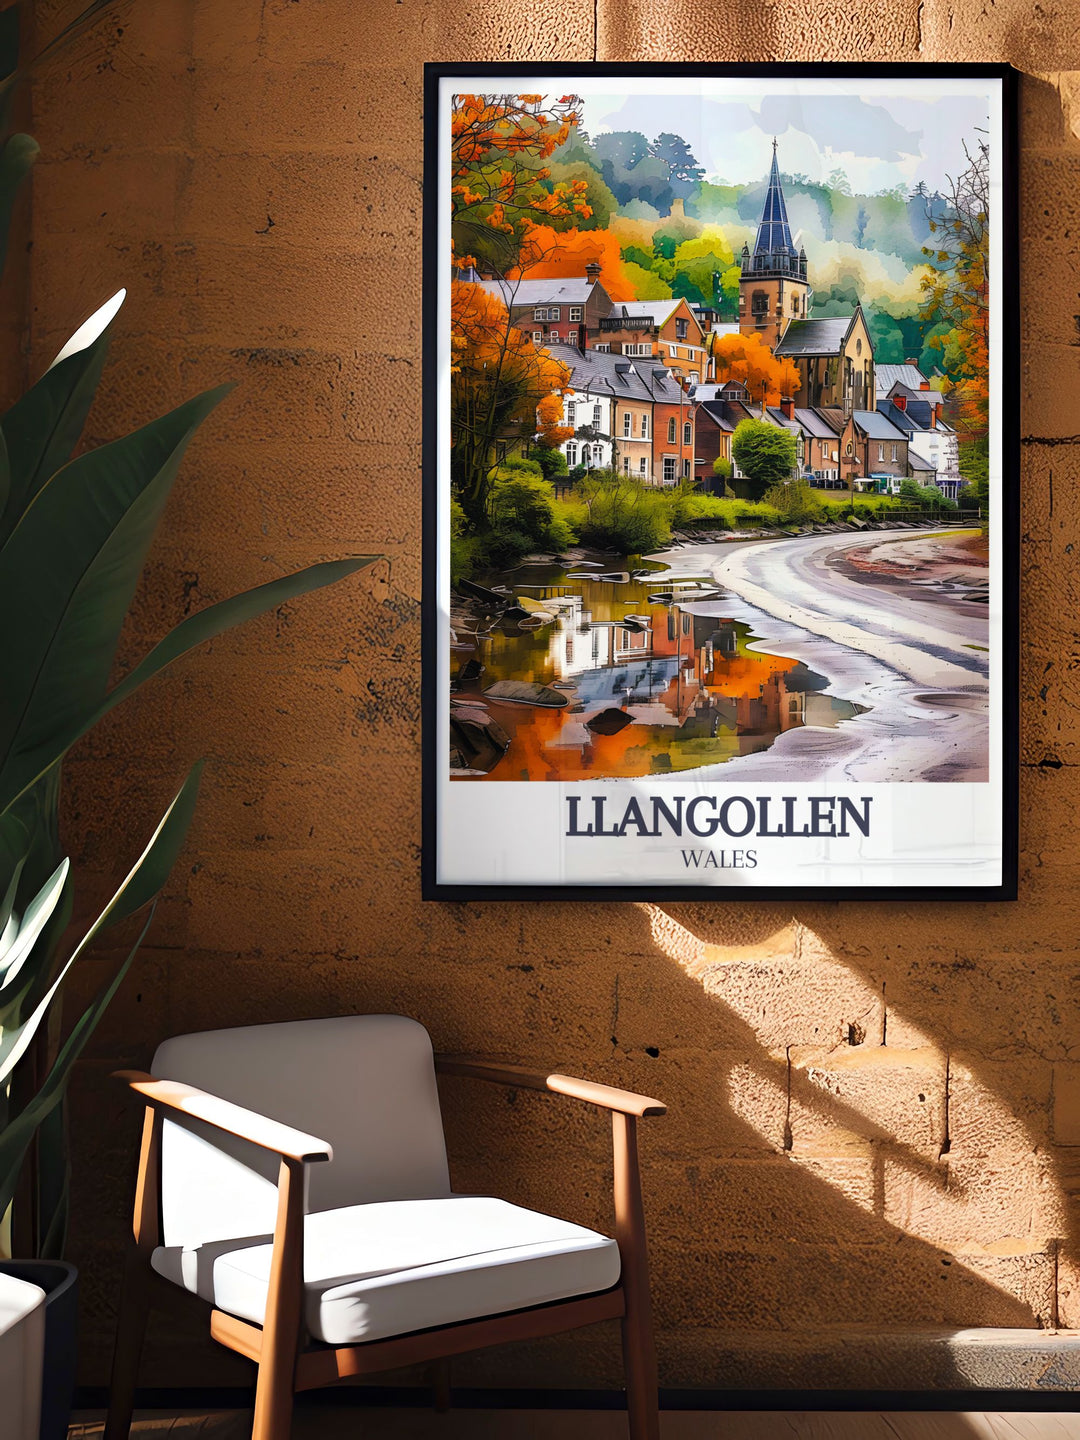 Decorate your space with this stunning print of River Dee, Llangollen Canal, and Llangollen Methodist Church, capturing Wales natural beauty.